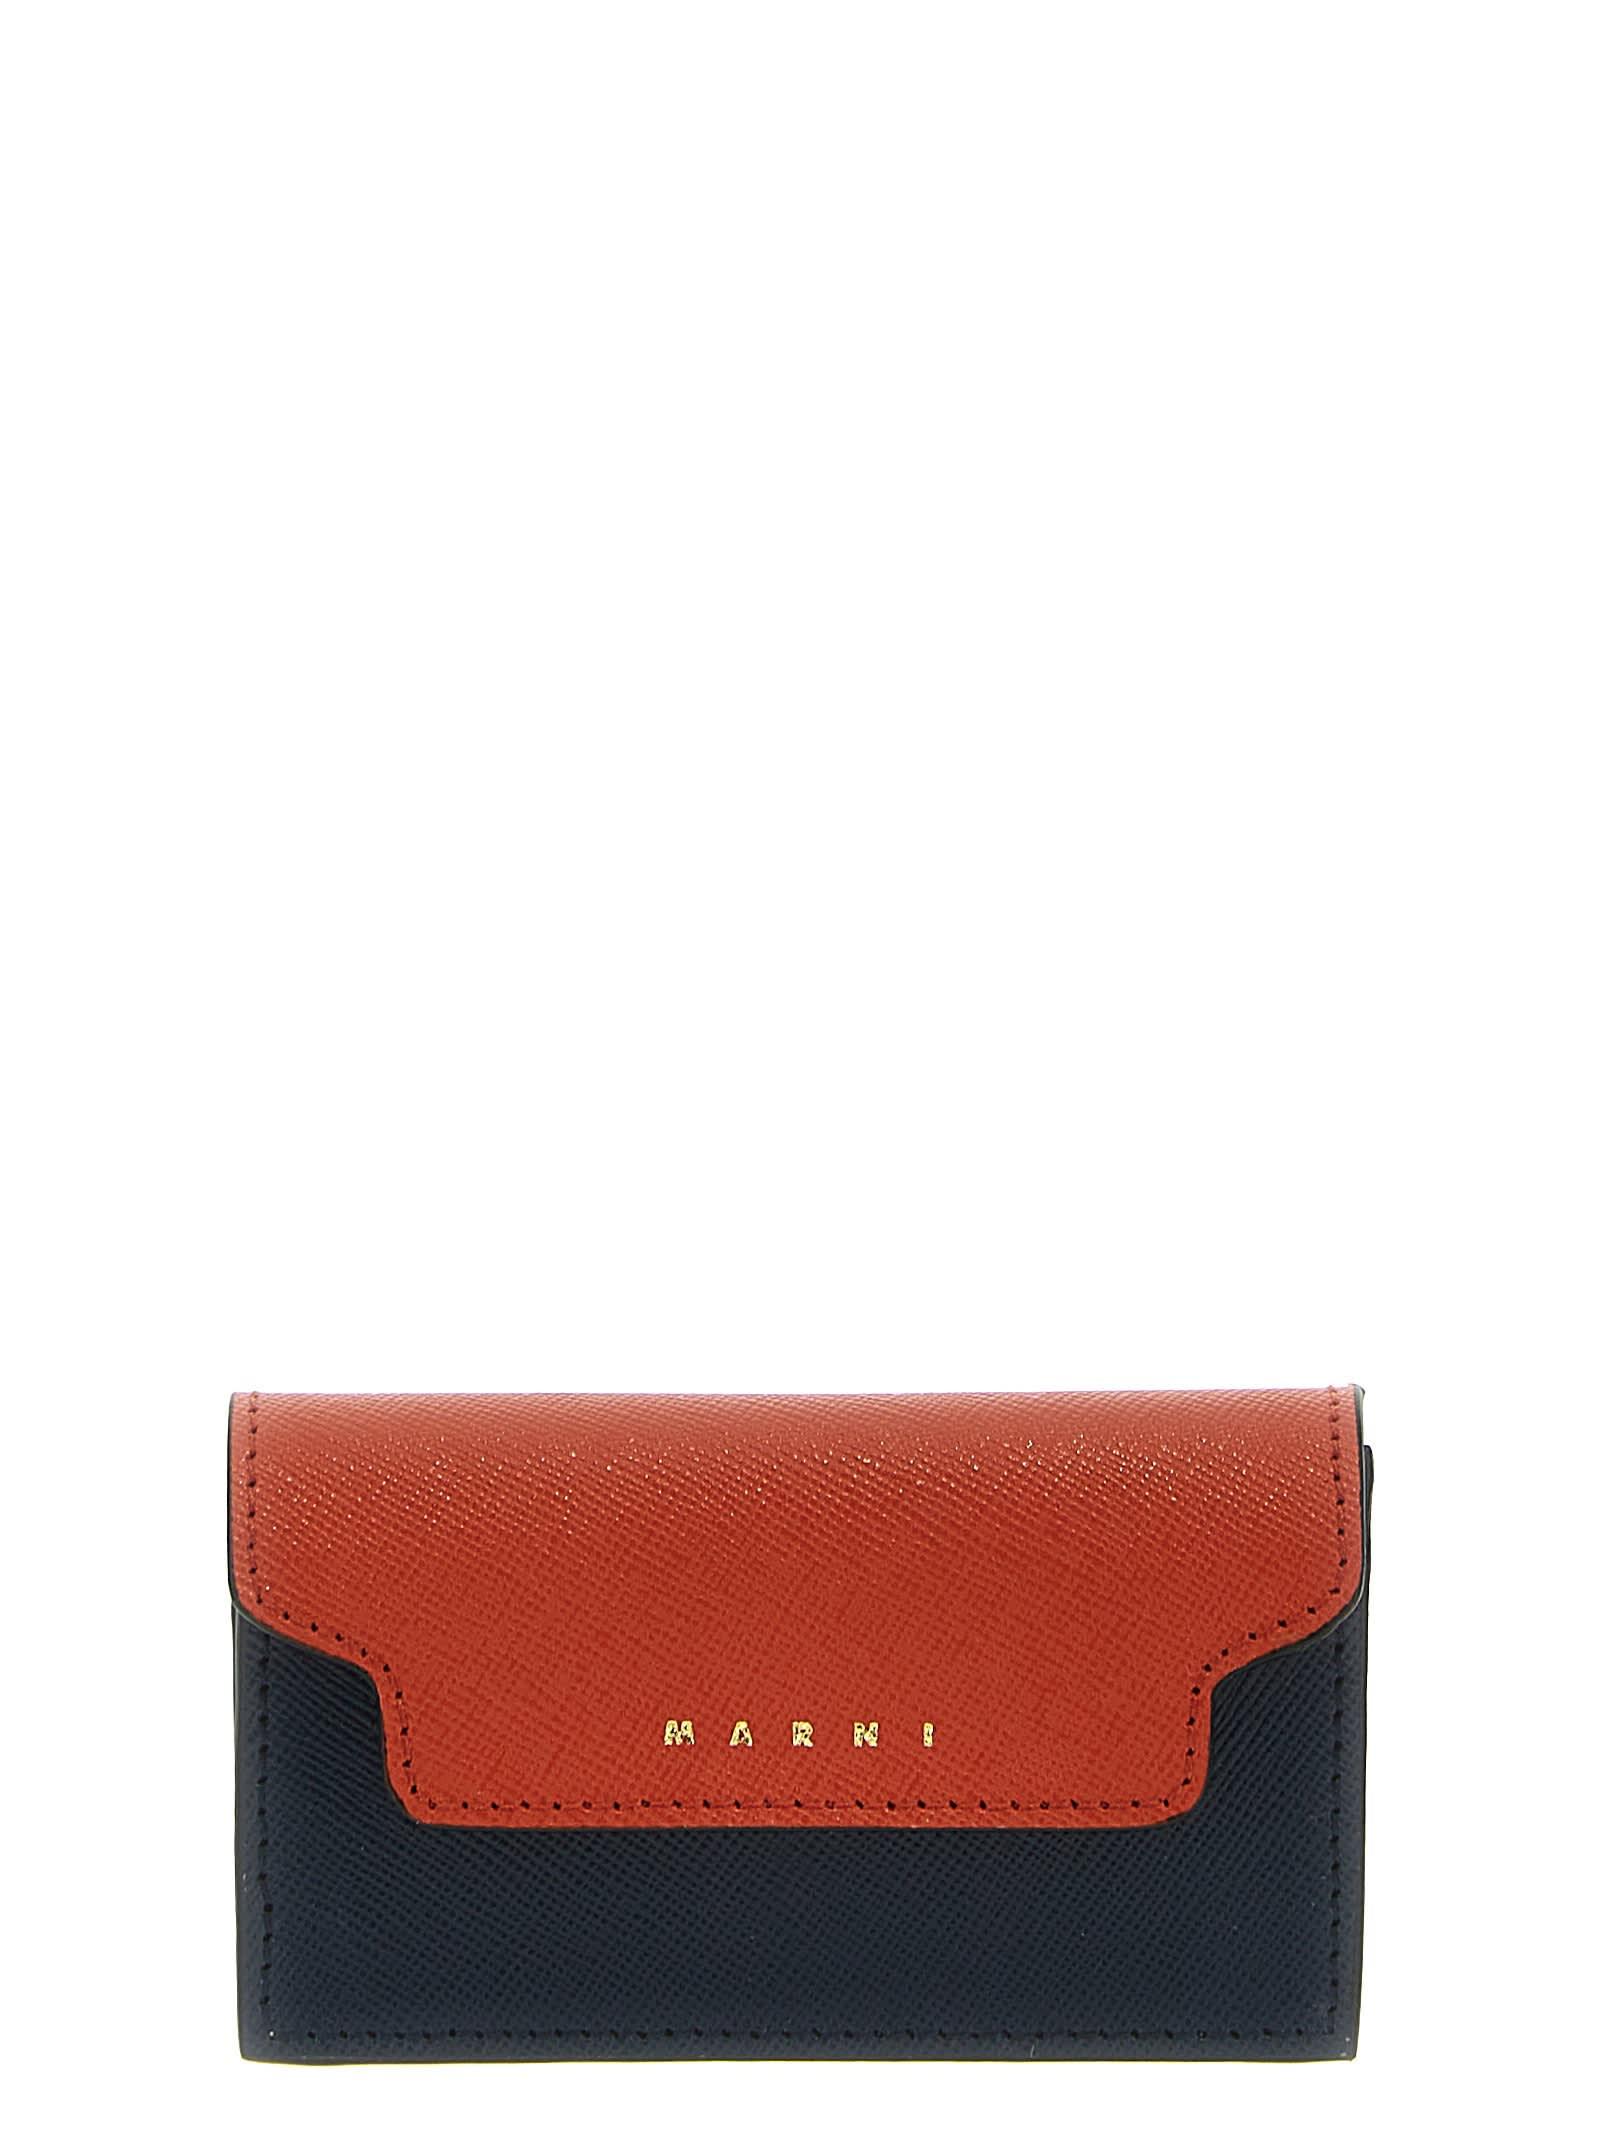 Marni Logo Business Card Holder Wallets, Card Holders in Red | Lyst